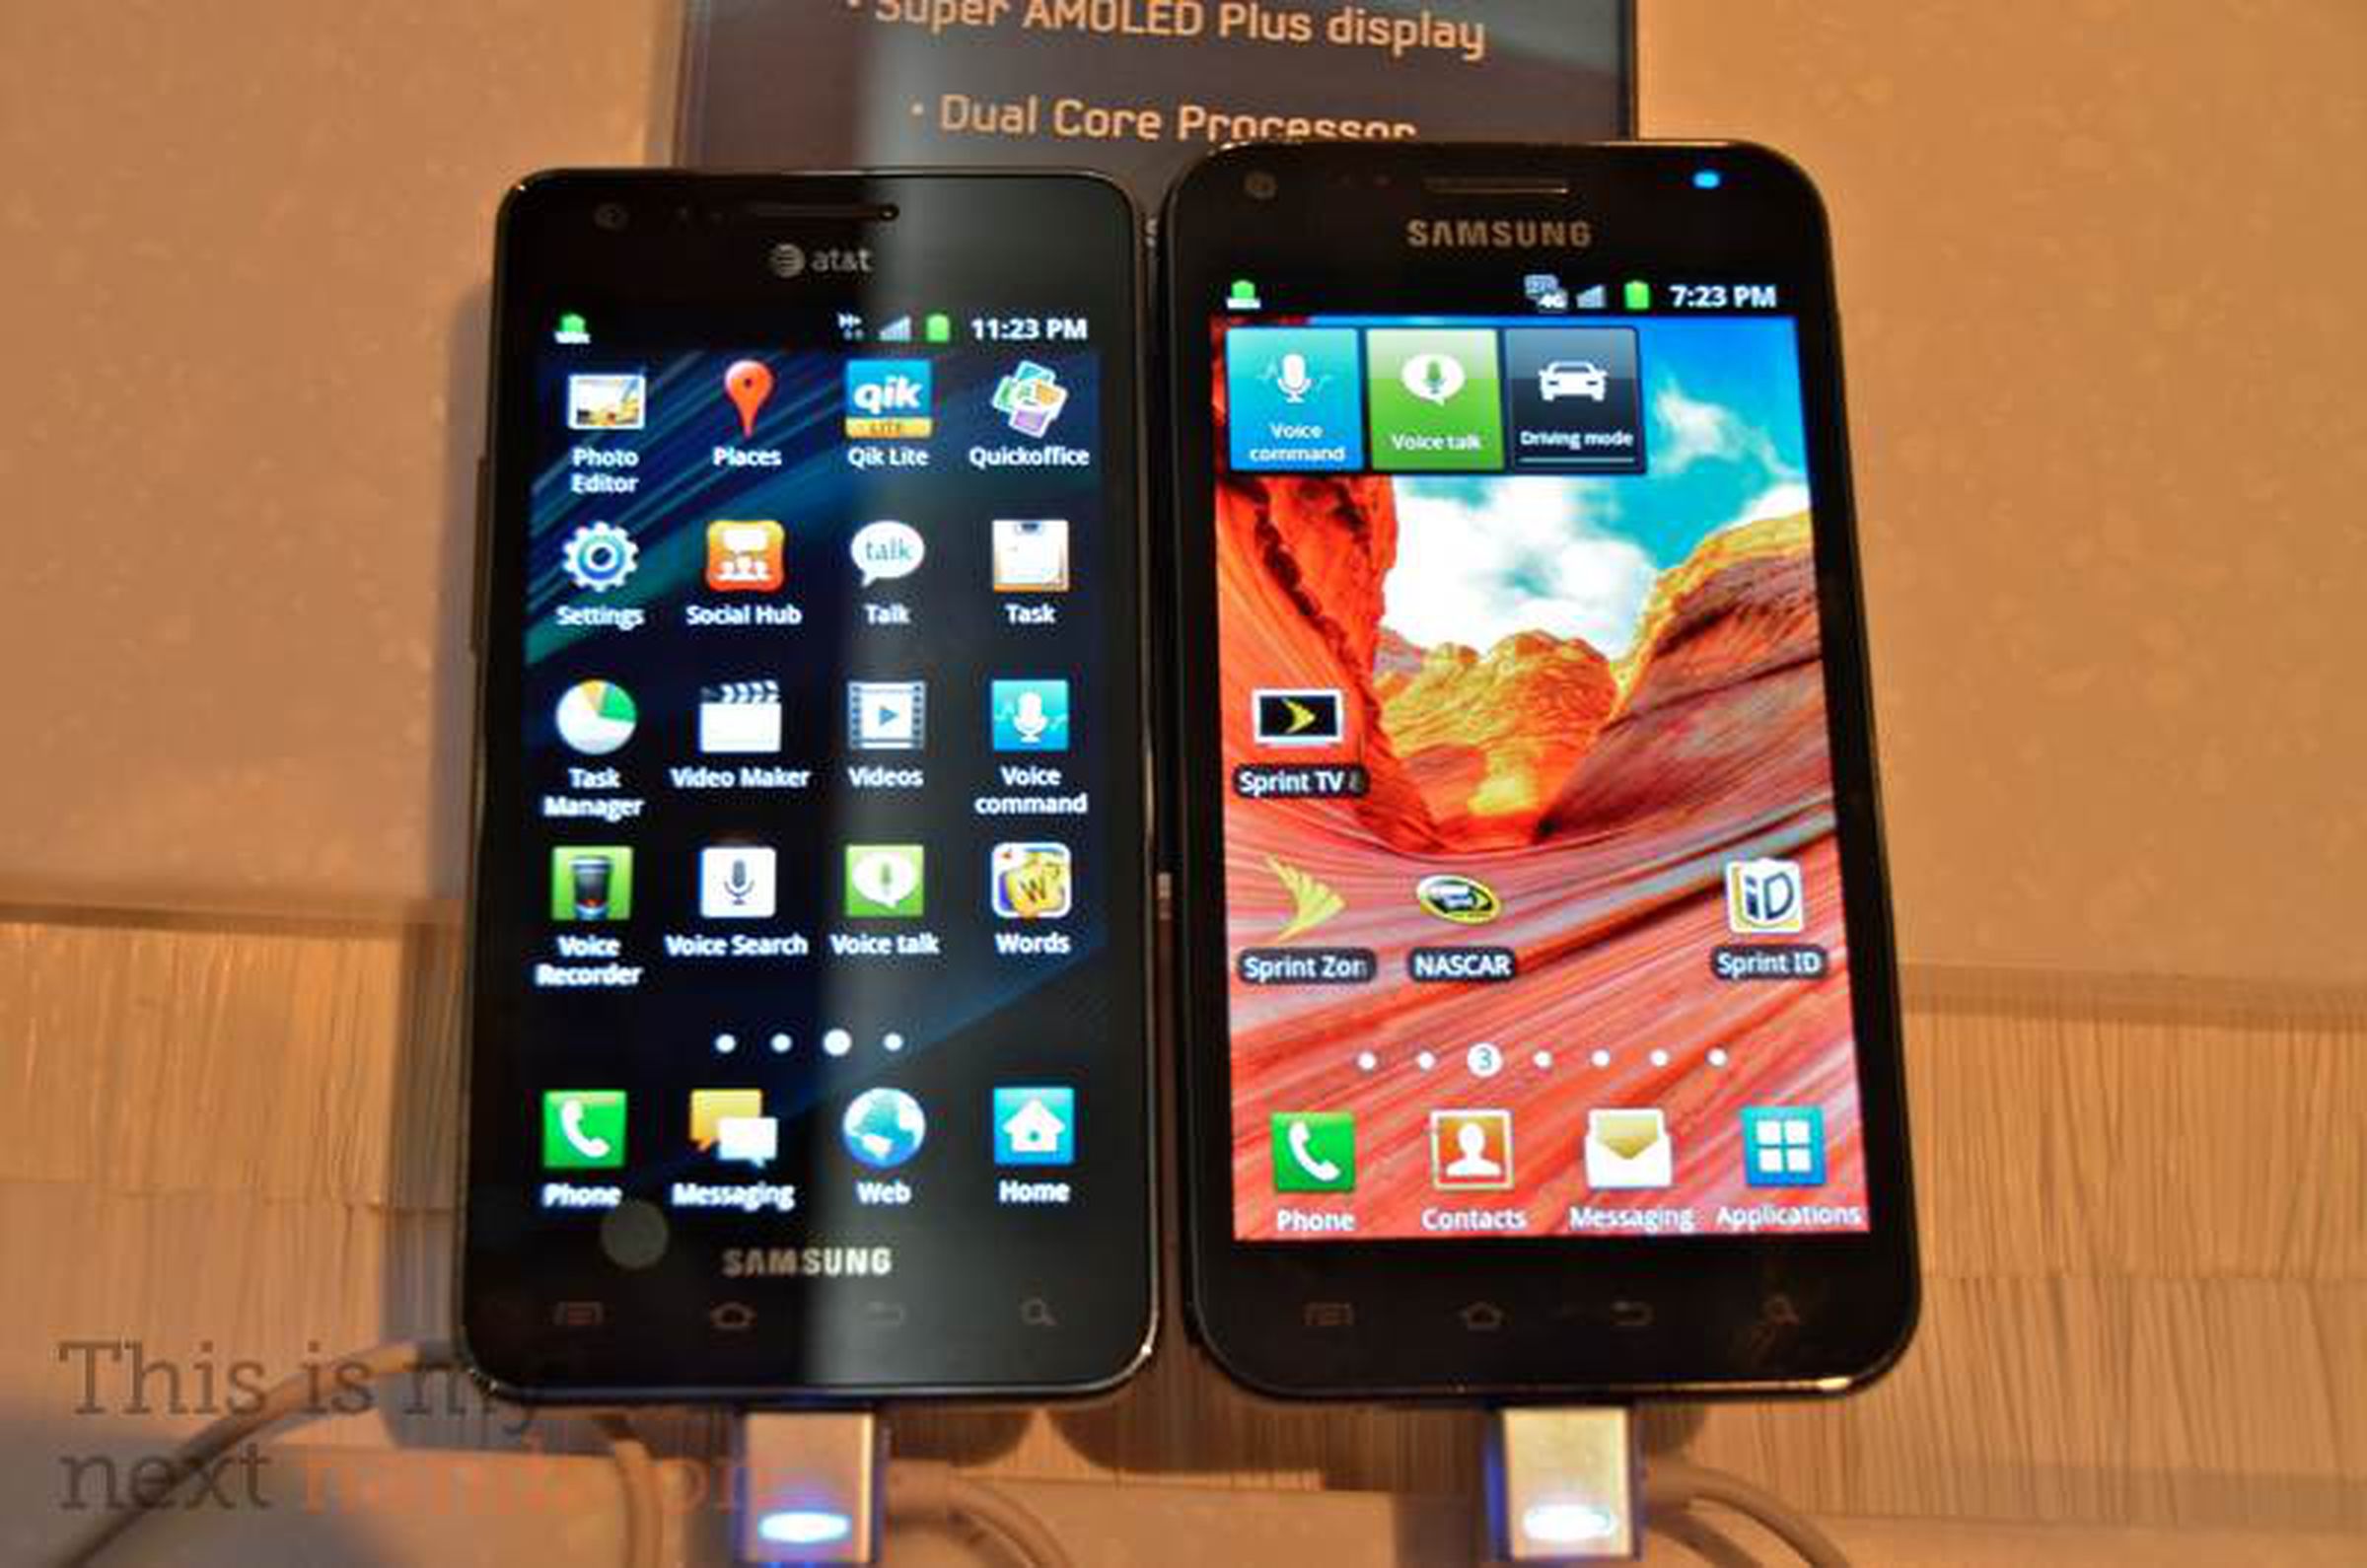 Galaxy S II family portrait: AT&T, Sprint, and T-Mobile